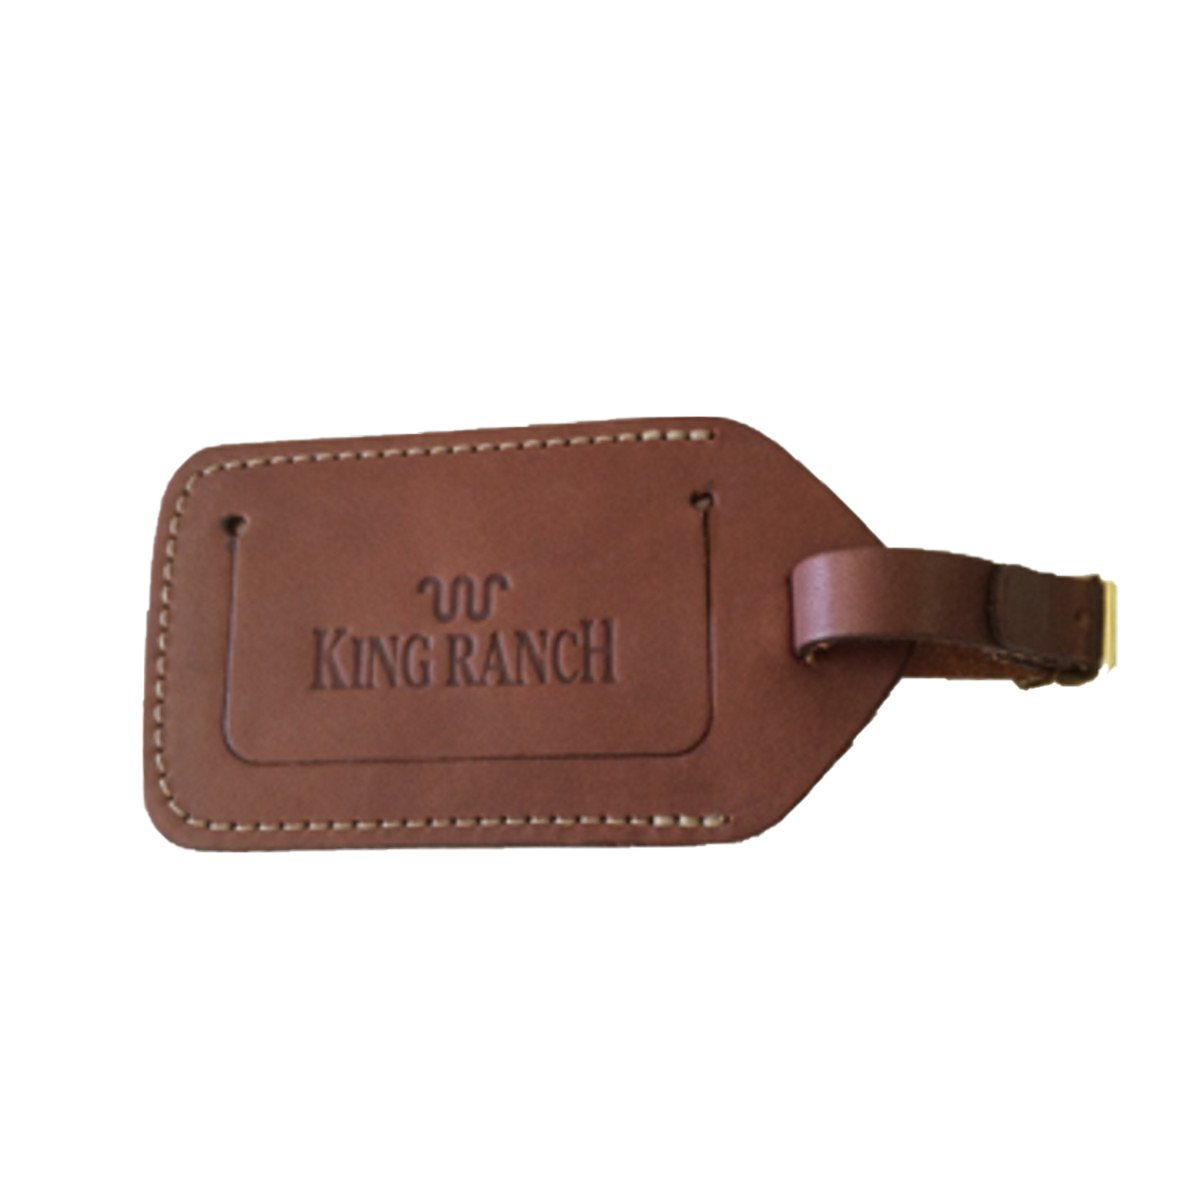 Brown leather luggage tag with King Ranch branding.